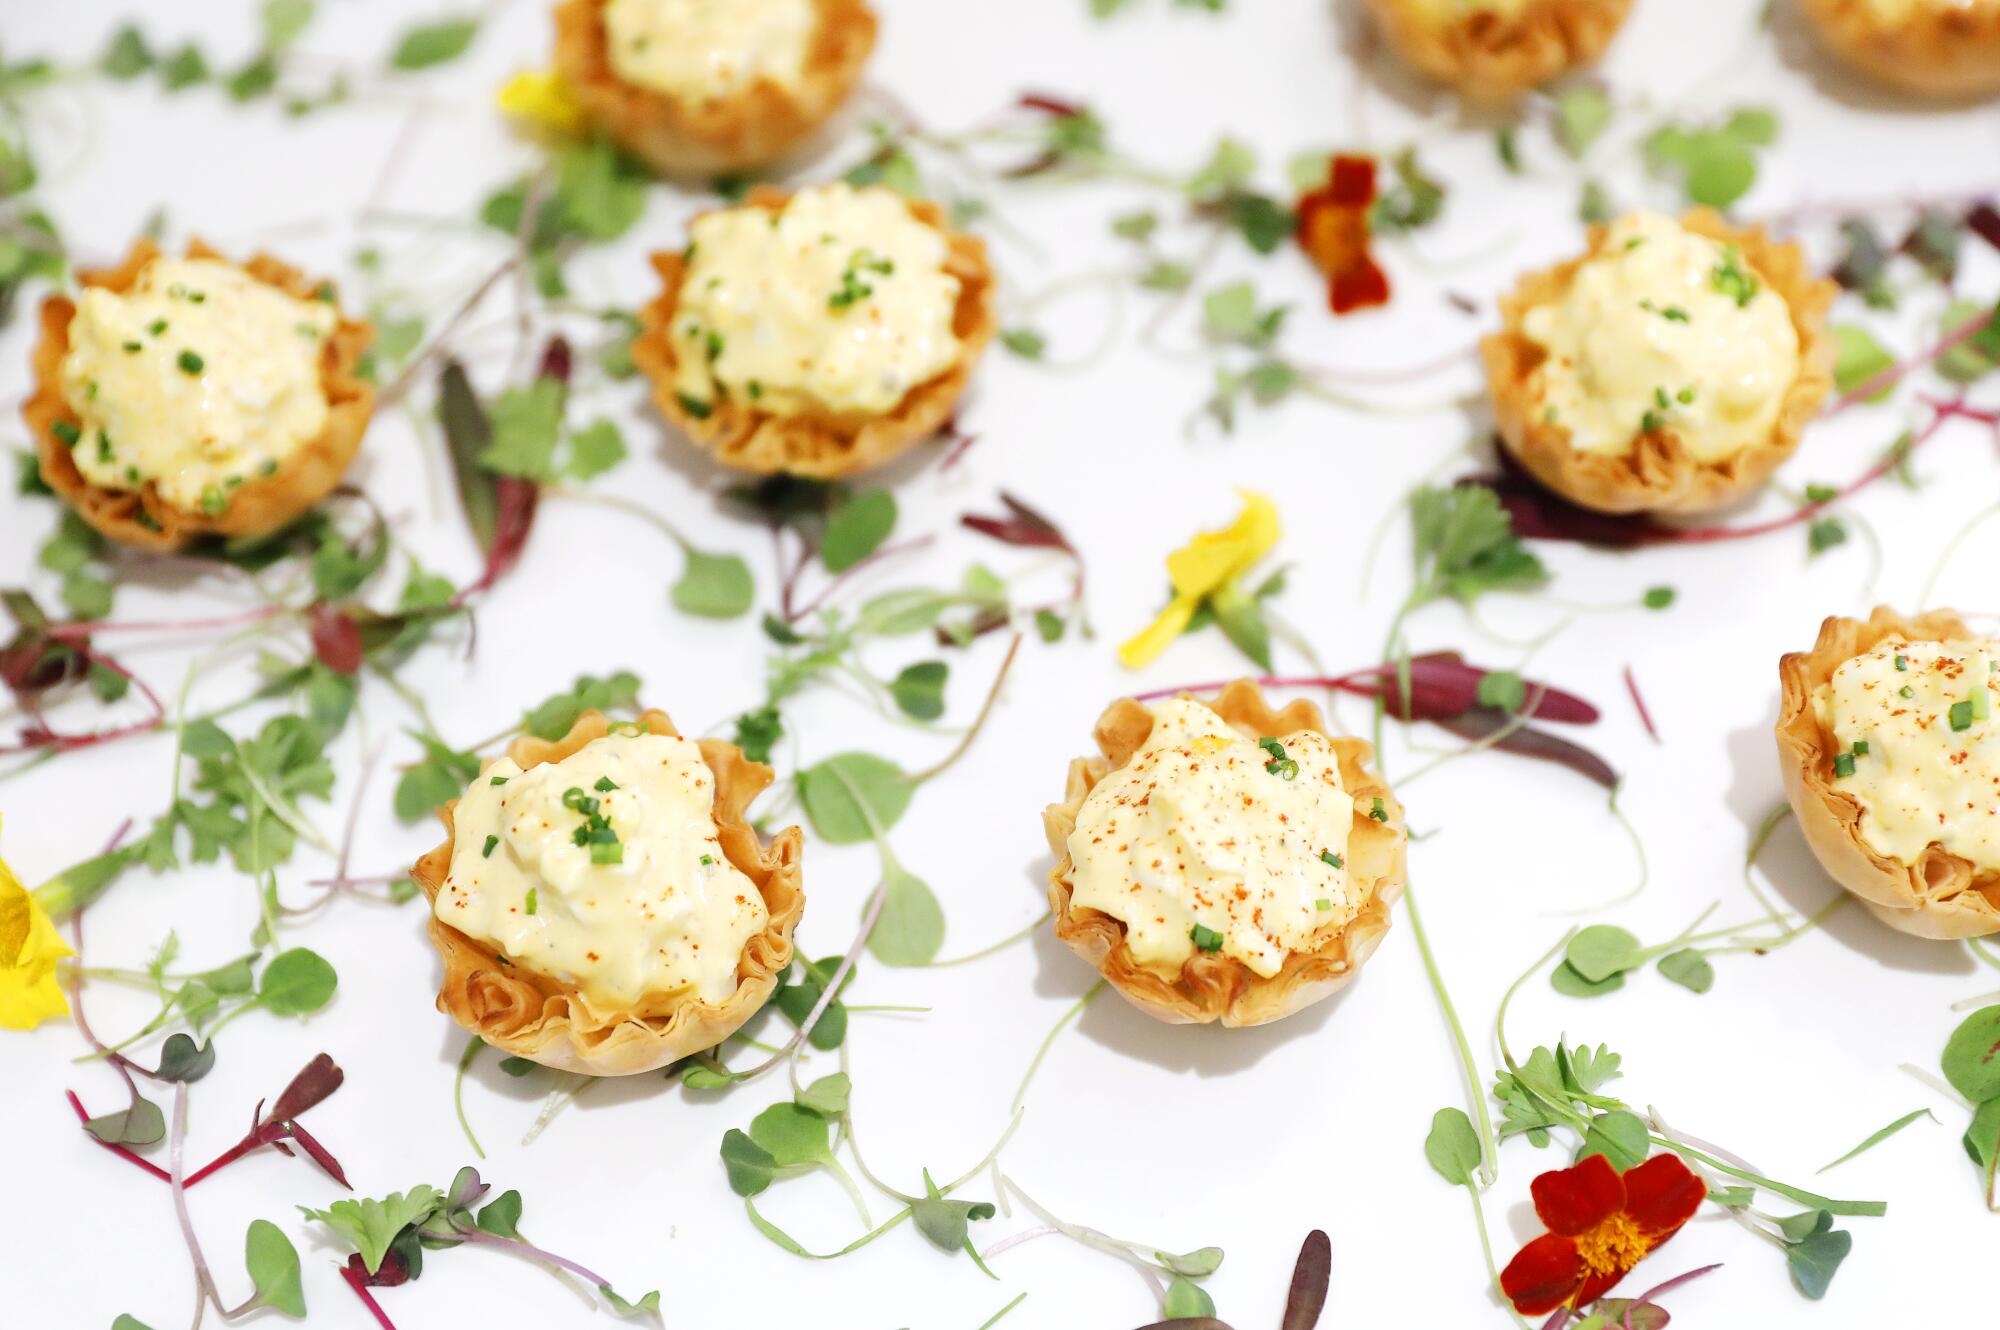 Deviled egg salad in phyllo cups on a floral tablecloth